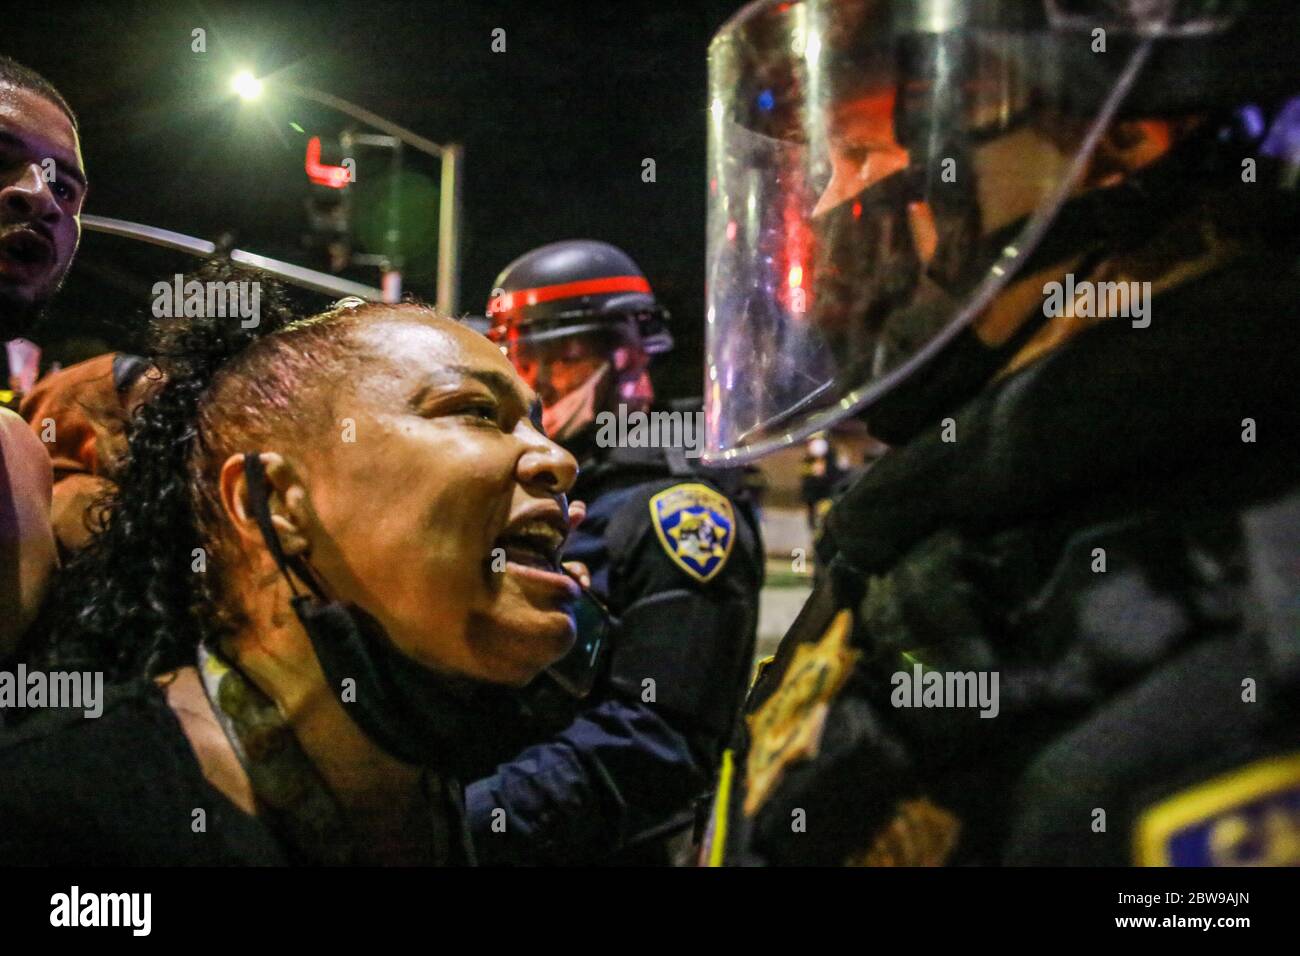 A protester yells at a police officer inches away during the demonstration. A peaceful protest, spurred by the death of George Floyd, turned violent as protesters clashed with police, throwing rocks and bottles at police while police responded by shooting pepper spray balls at protesters and using flash bang grenades to disperse the crowd. Stock Photo